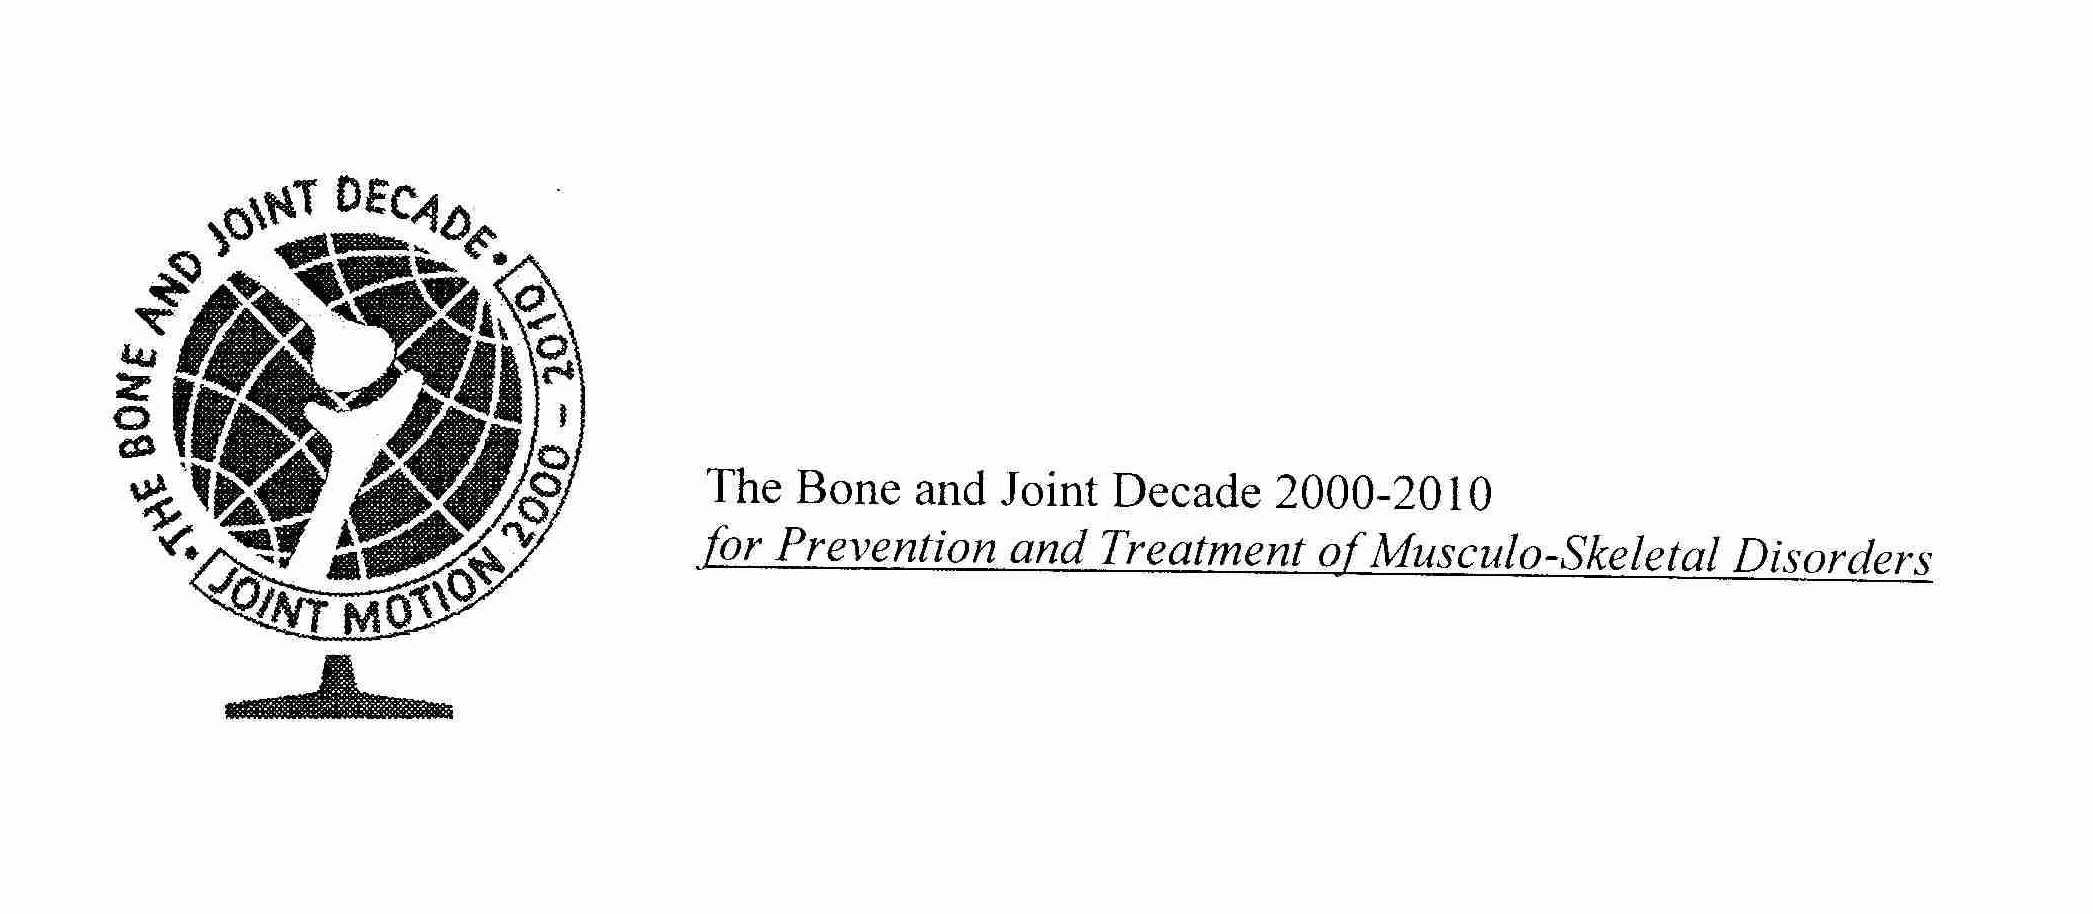  ·THE BONE AND JOINT DECADE·JOINT MOTION 2000-2010 THE BONE AND JOINT DECADE JOINT MOTION 2000-2010 FOR PREVENTION AND TREATMENT OF MUSCULO-SKELETAL DISORDERS